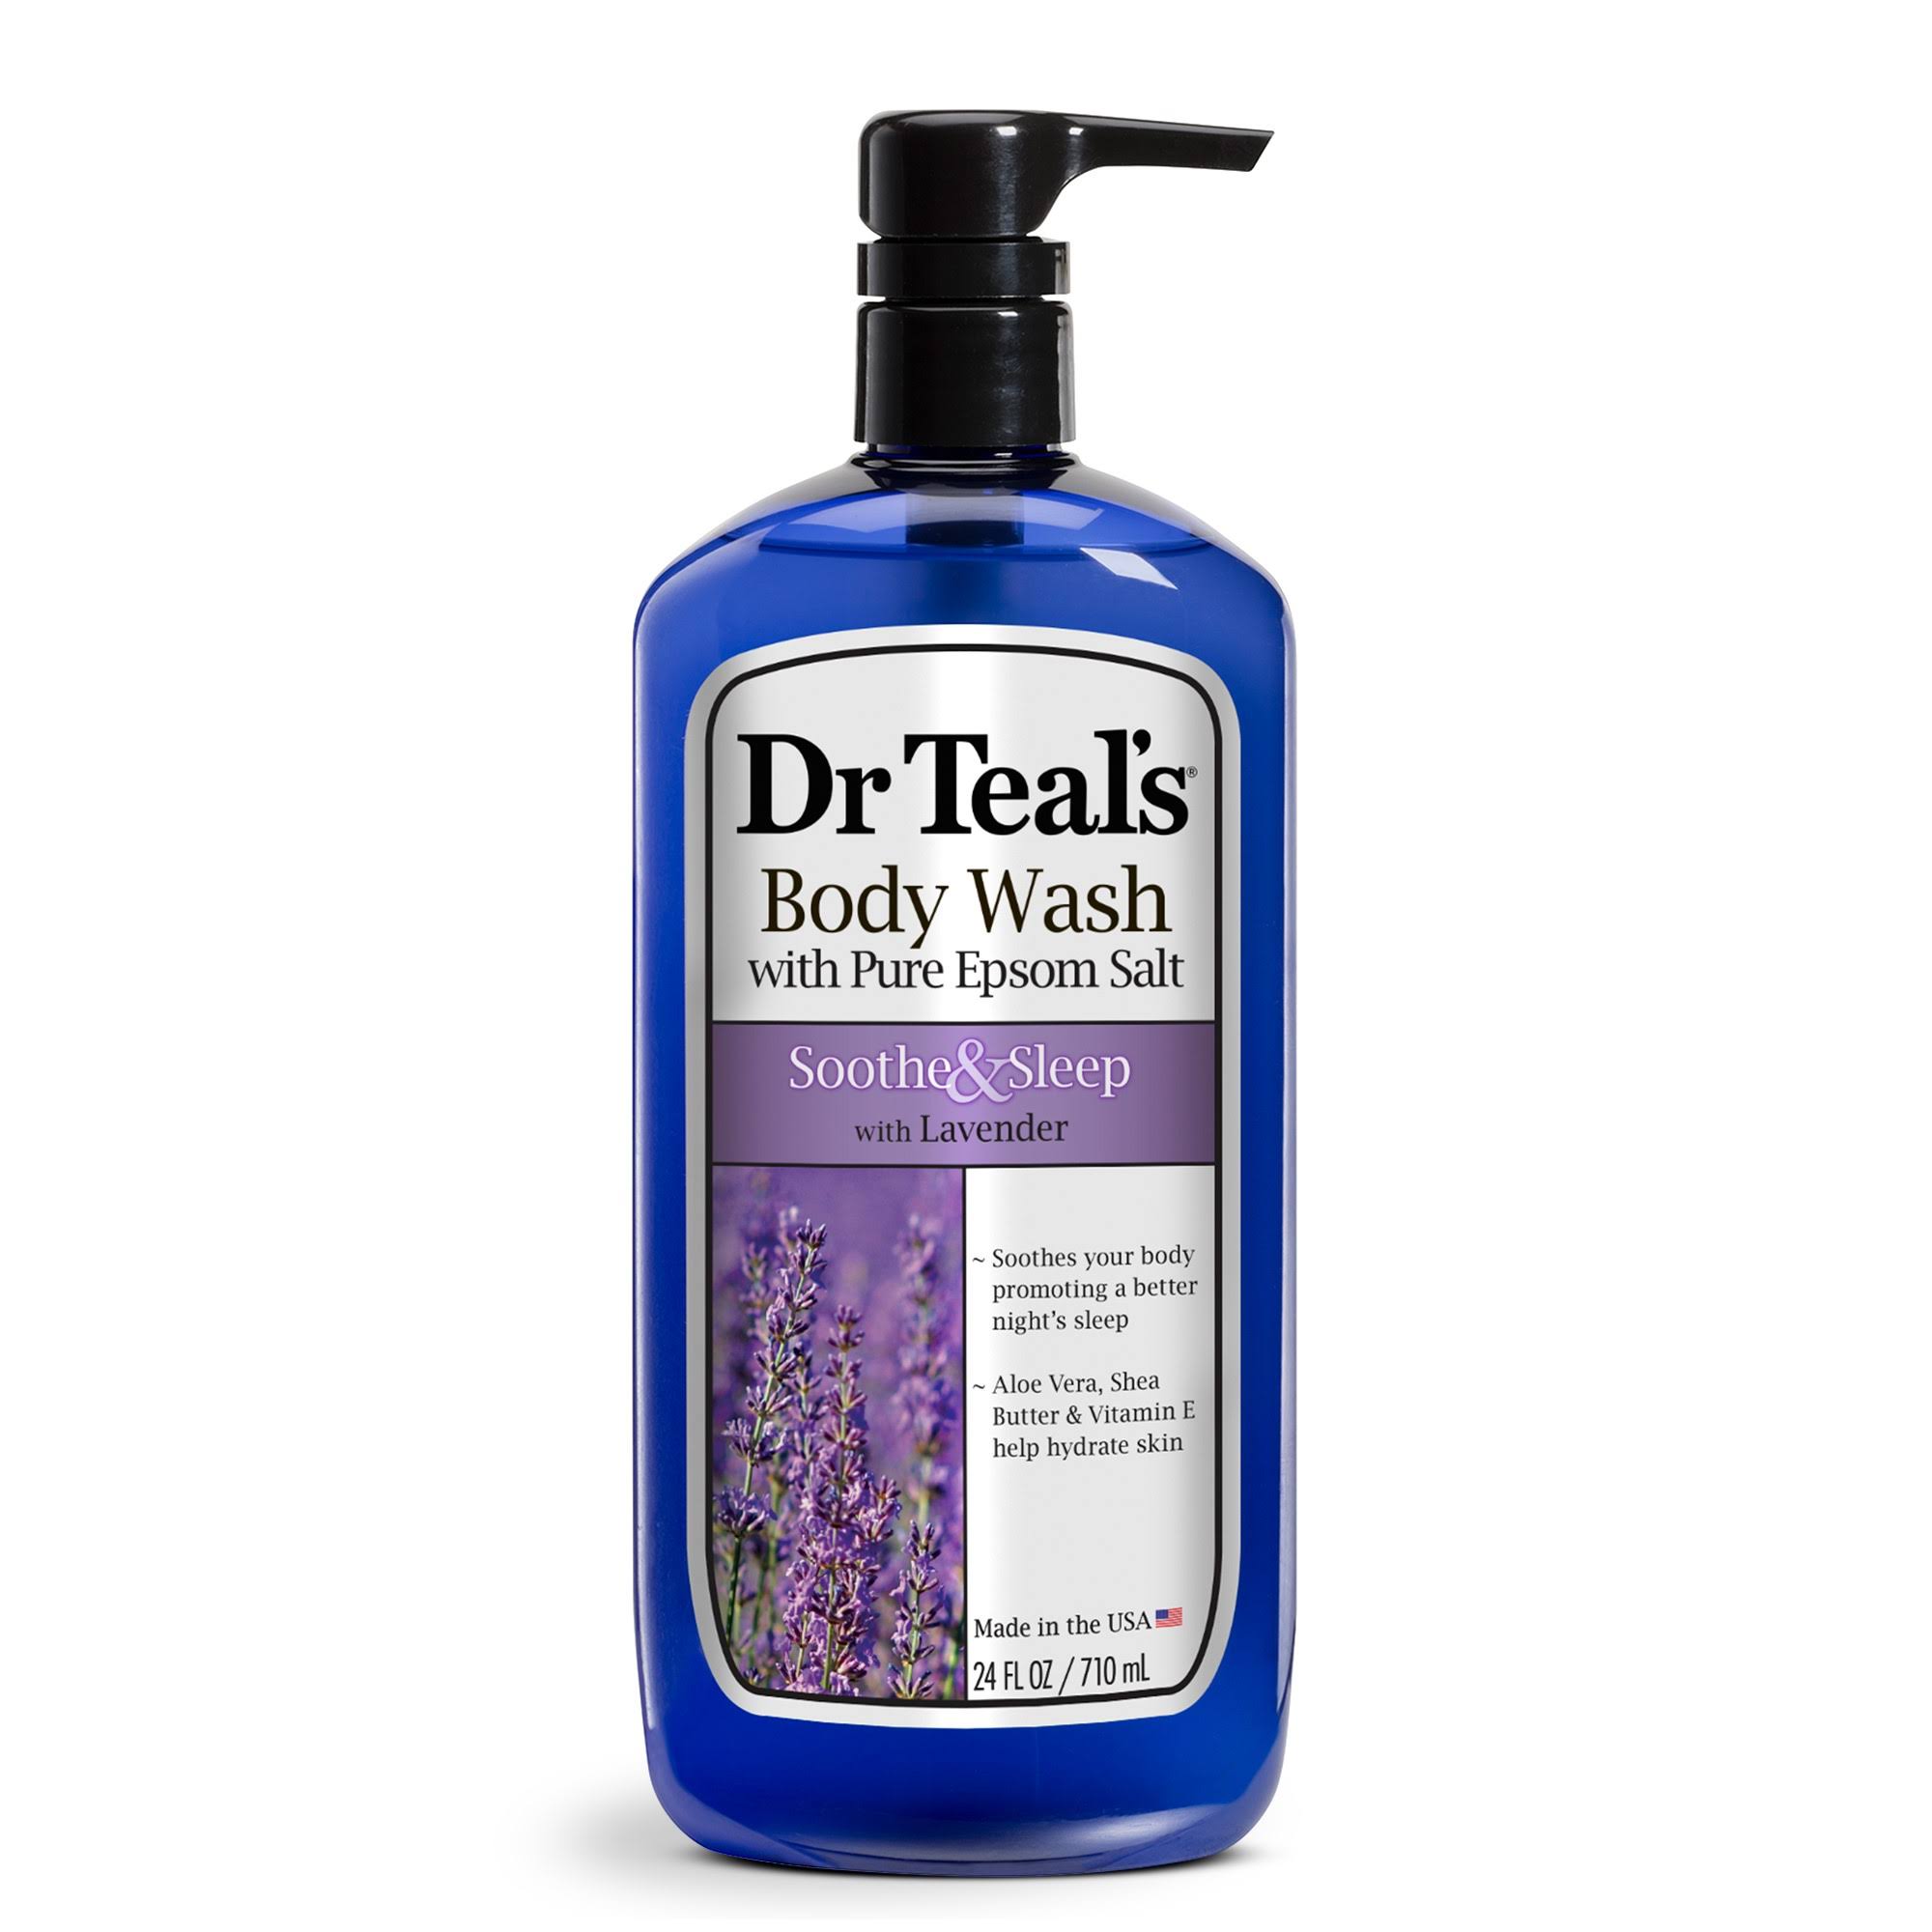 Dr Teal's Body Wash - Soothe and Sleep with Lavender, 710ml